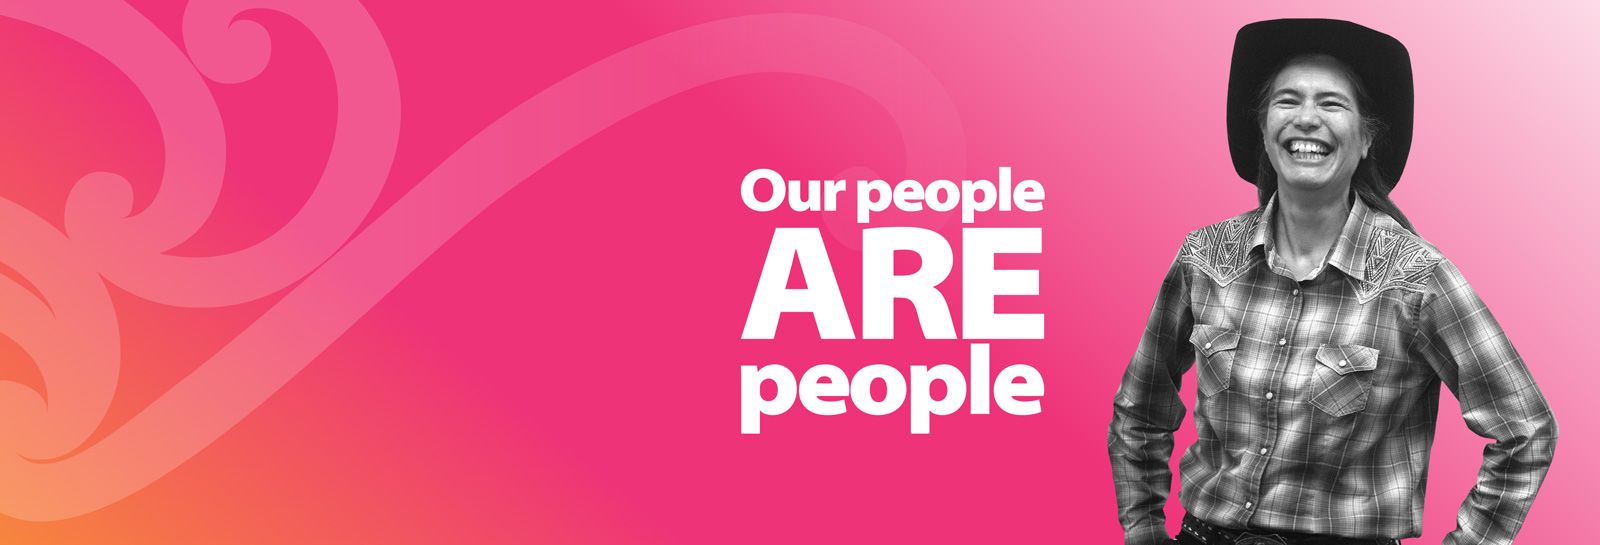 Our people are people banner image